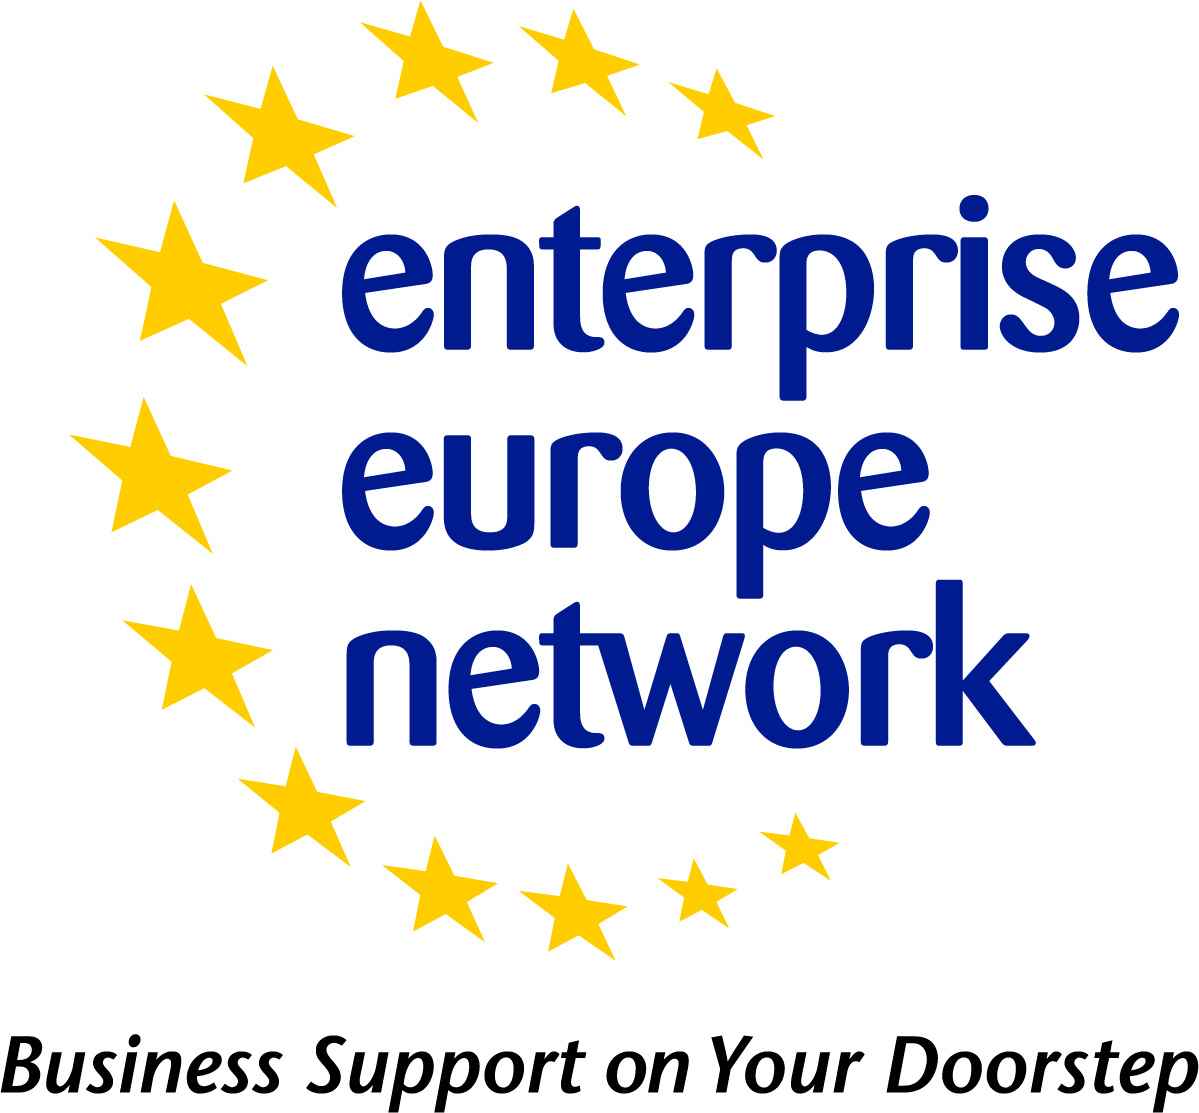 The Enterprise Europe Network in Iceland assists small and medium-sized companies, as well as universities and public bodies, through the world’s largest business network.